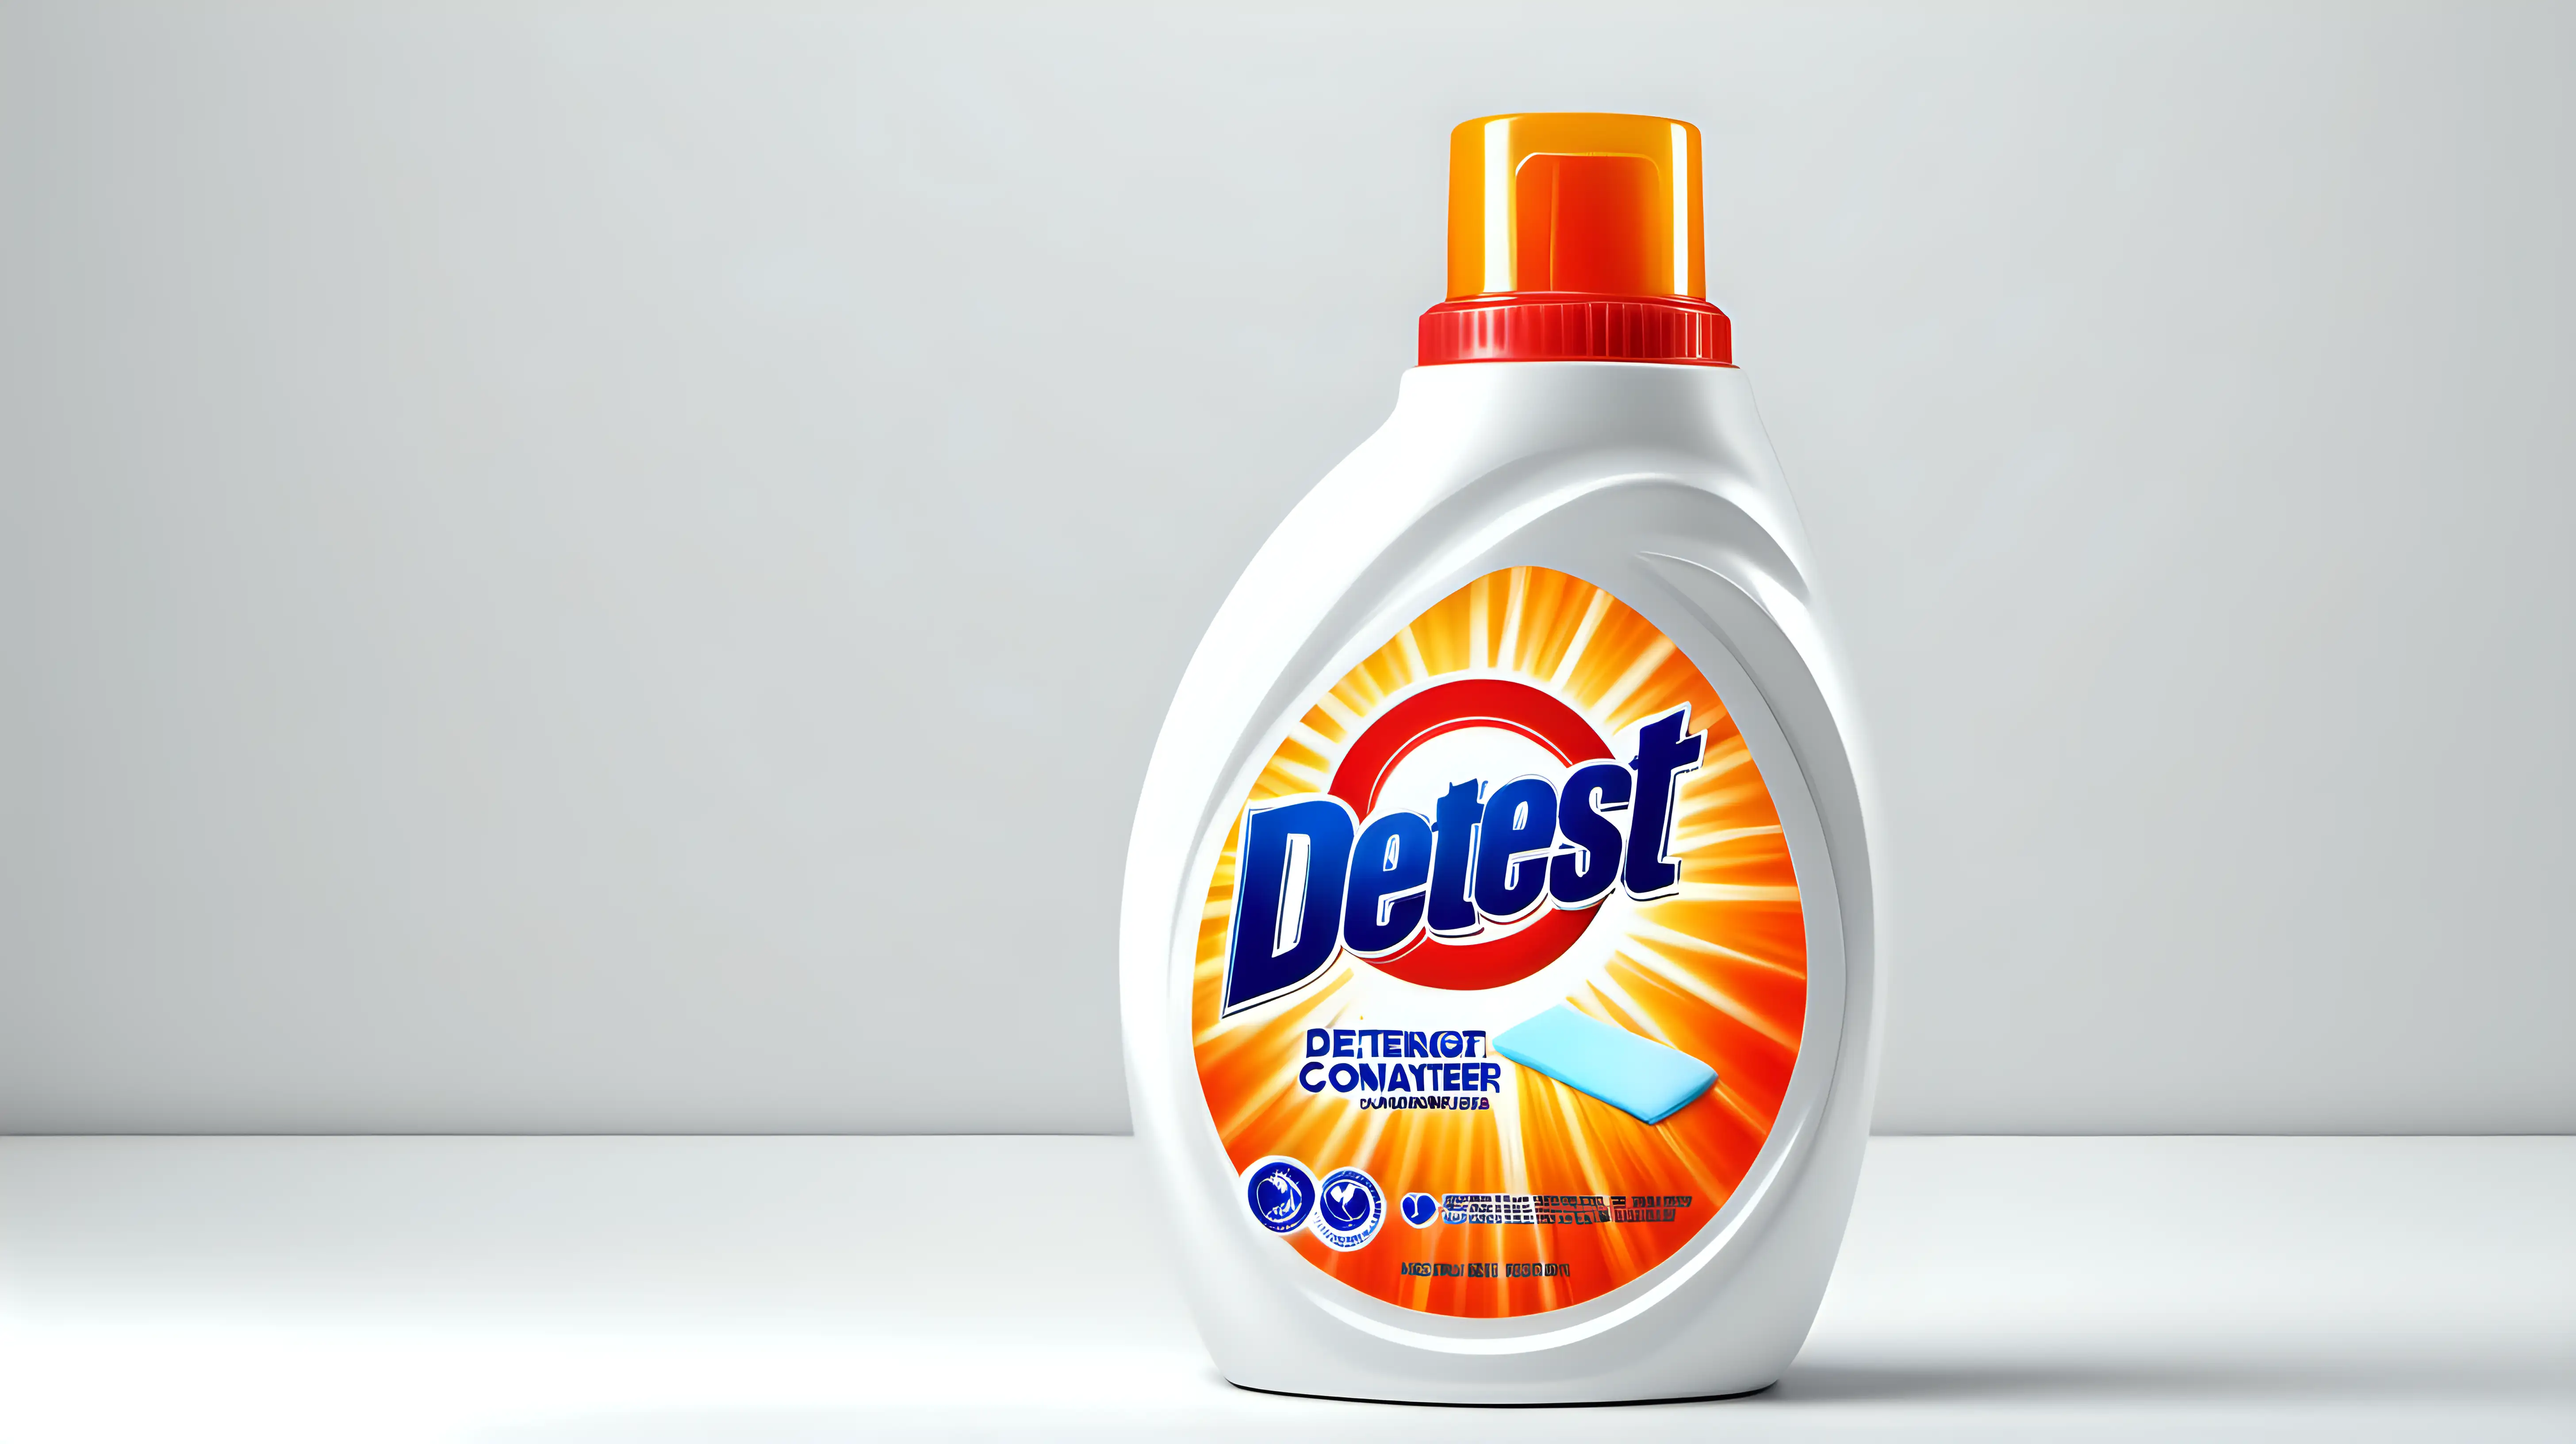 Bright and Clean Detergent Container on White Background